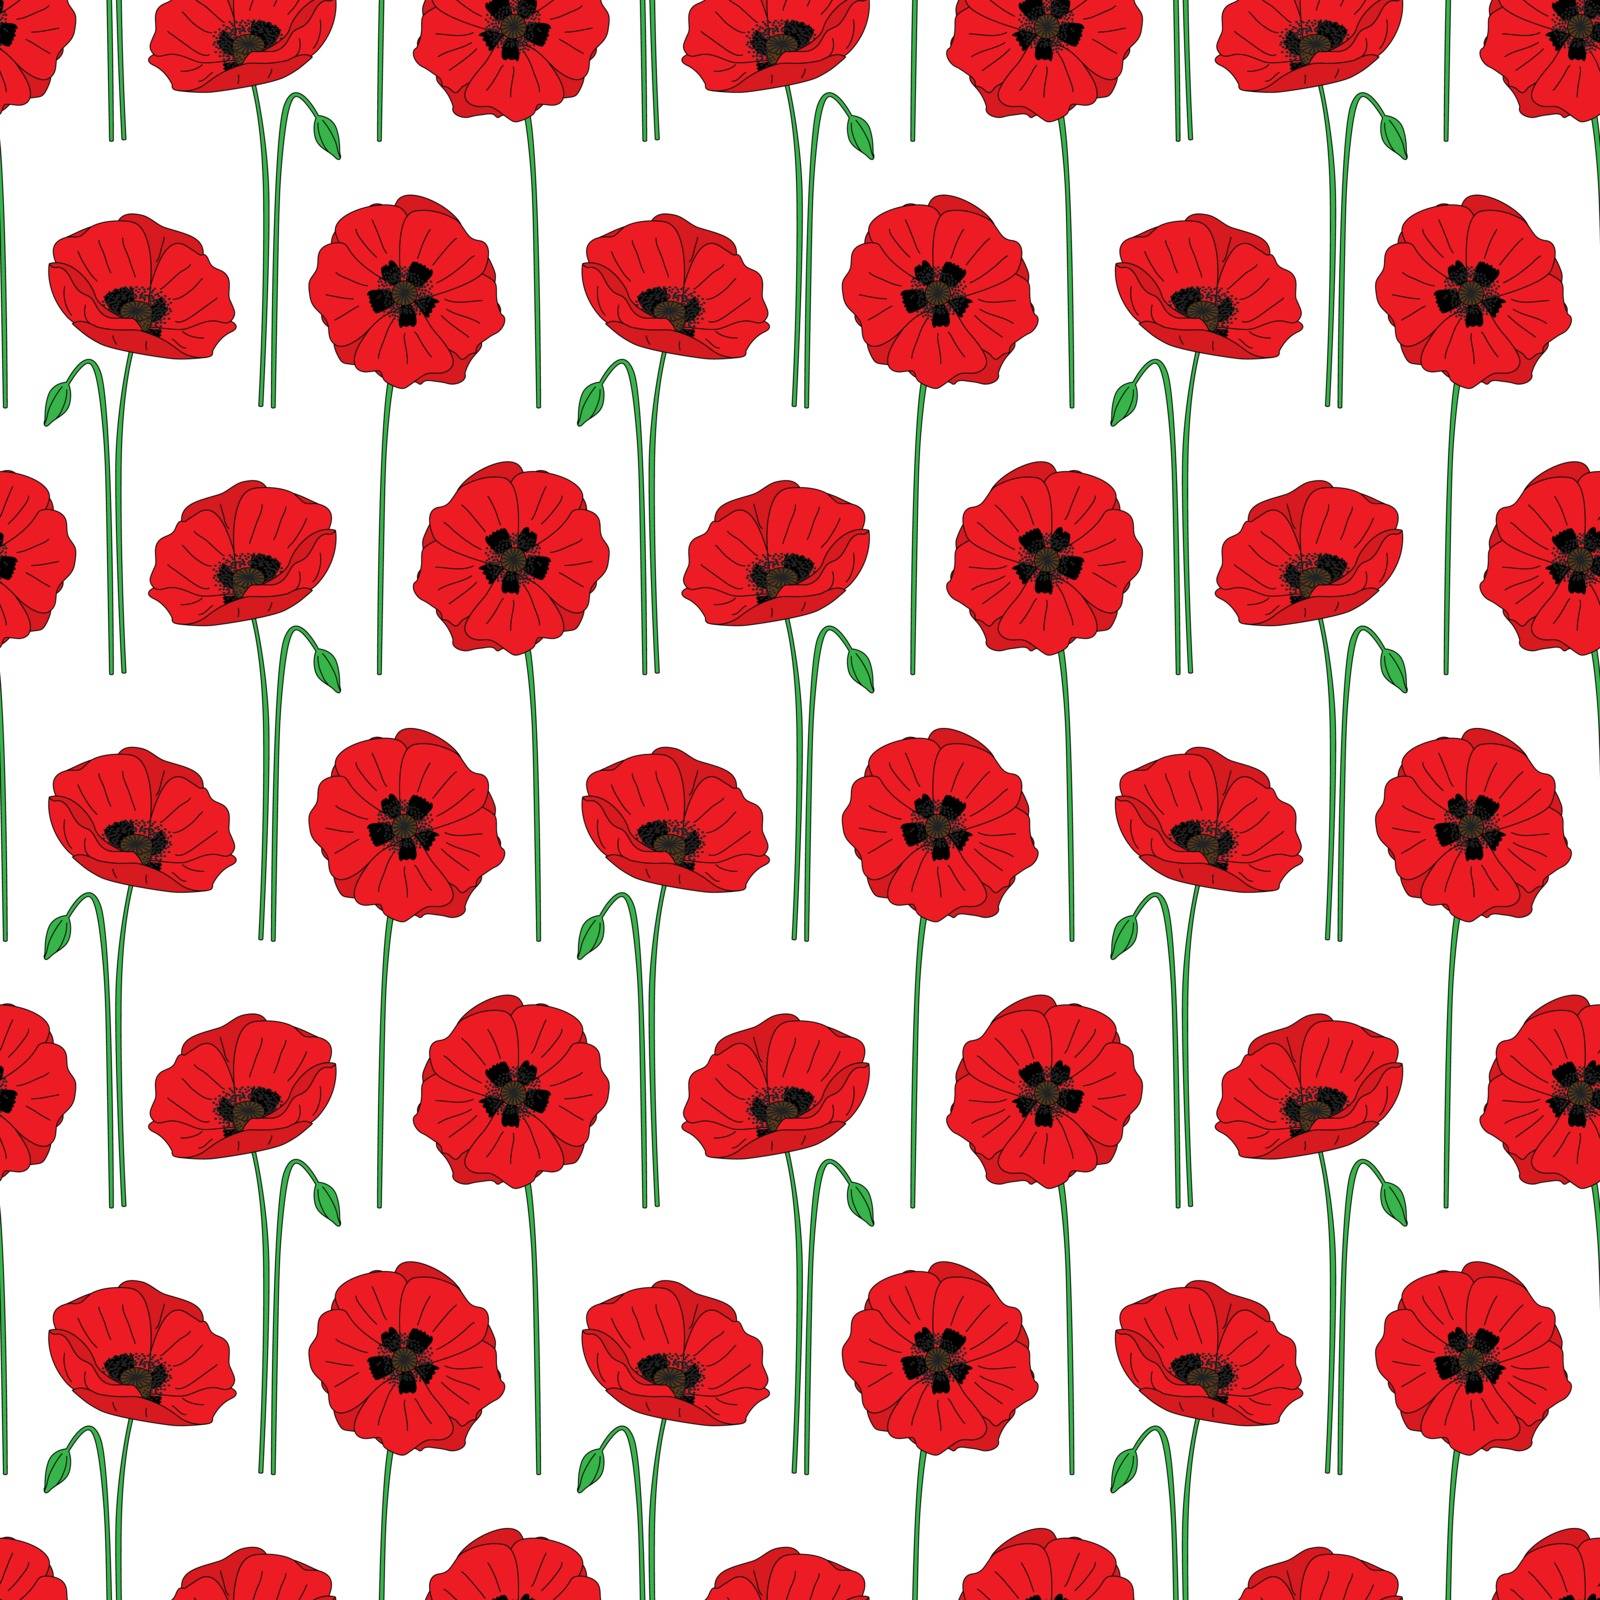 Seamless pattern made of red illustrated poppies